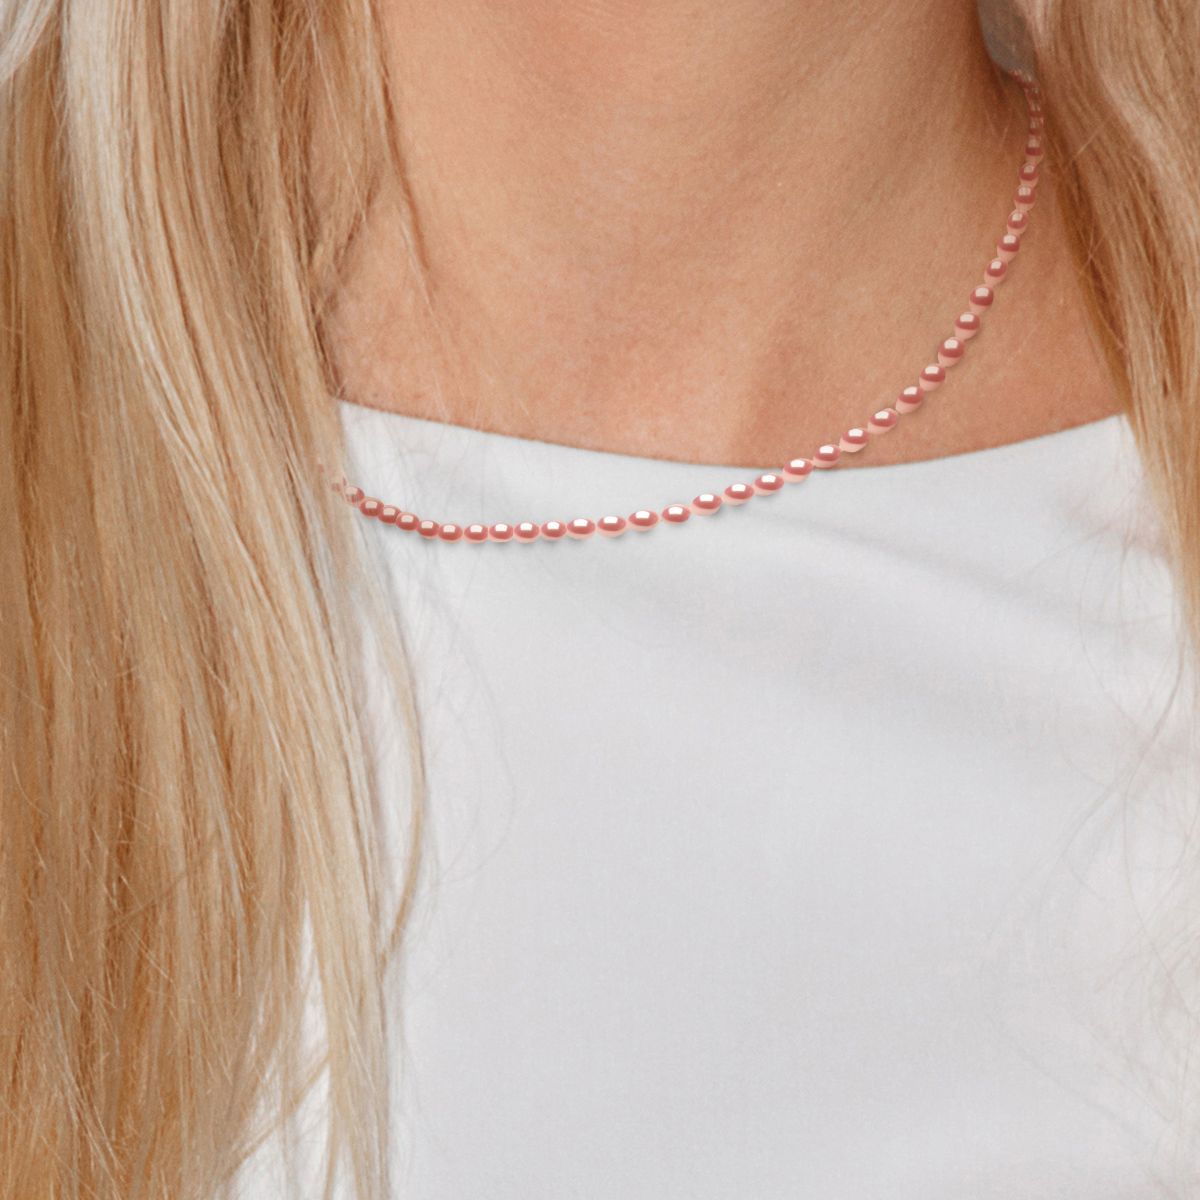 Necklace made with Cultured Freshwater Pearls rice grain and Blanc 4-5 mm - Natural Pink Color spring-loaded clasp White Gold 750 Length 42 cm , 16,5 in- - Our jewellery is made in France and will be delivered in a gift box accompanied by a Certificate of Authenticity and International Warranty